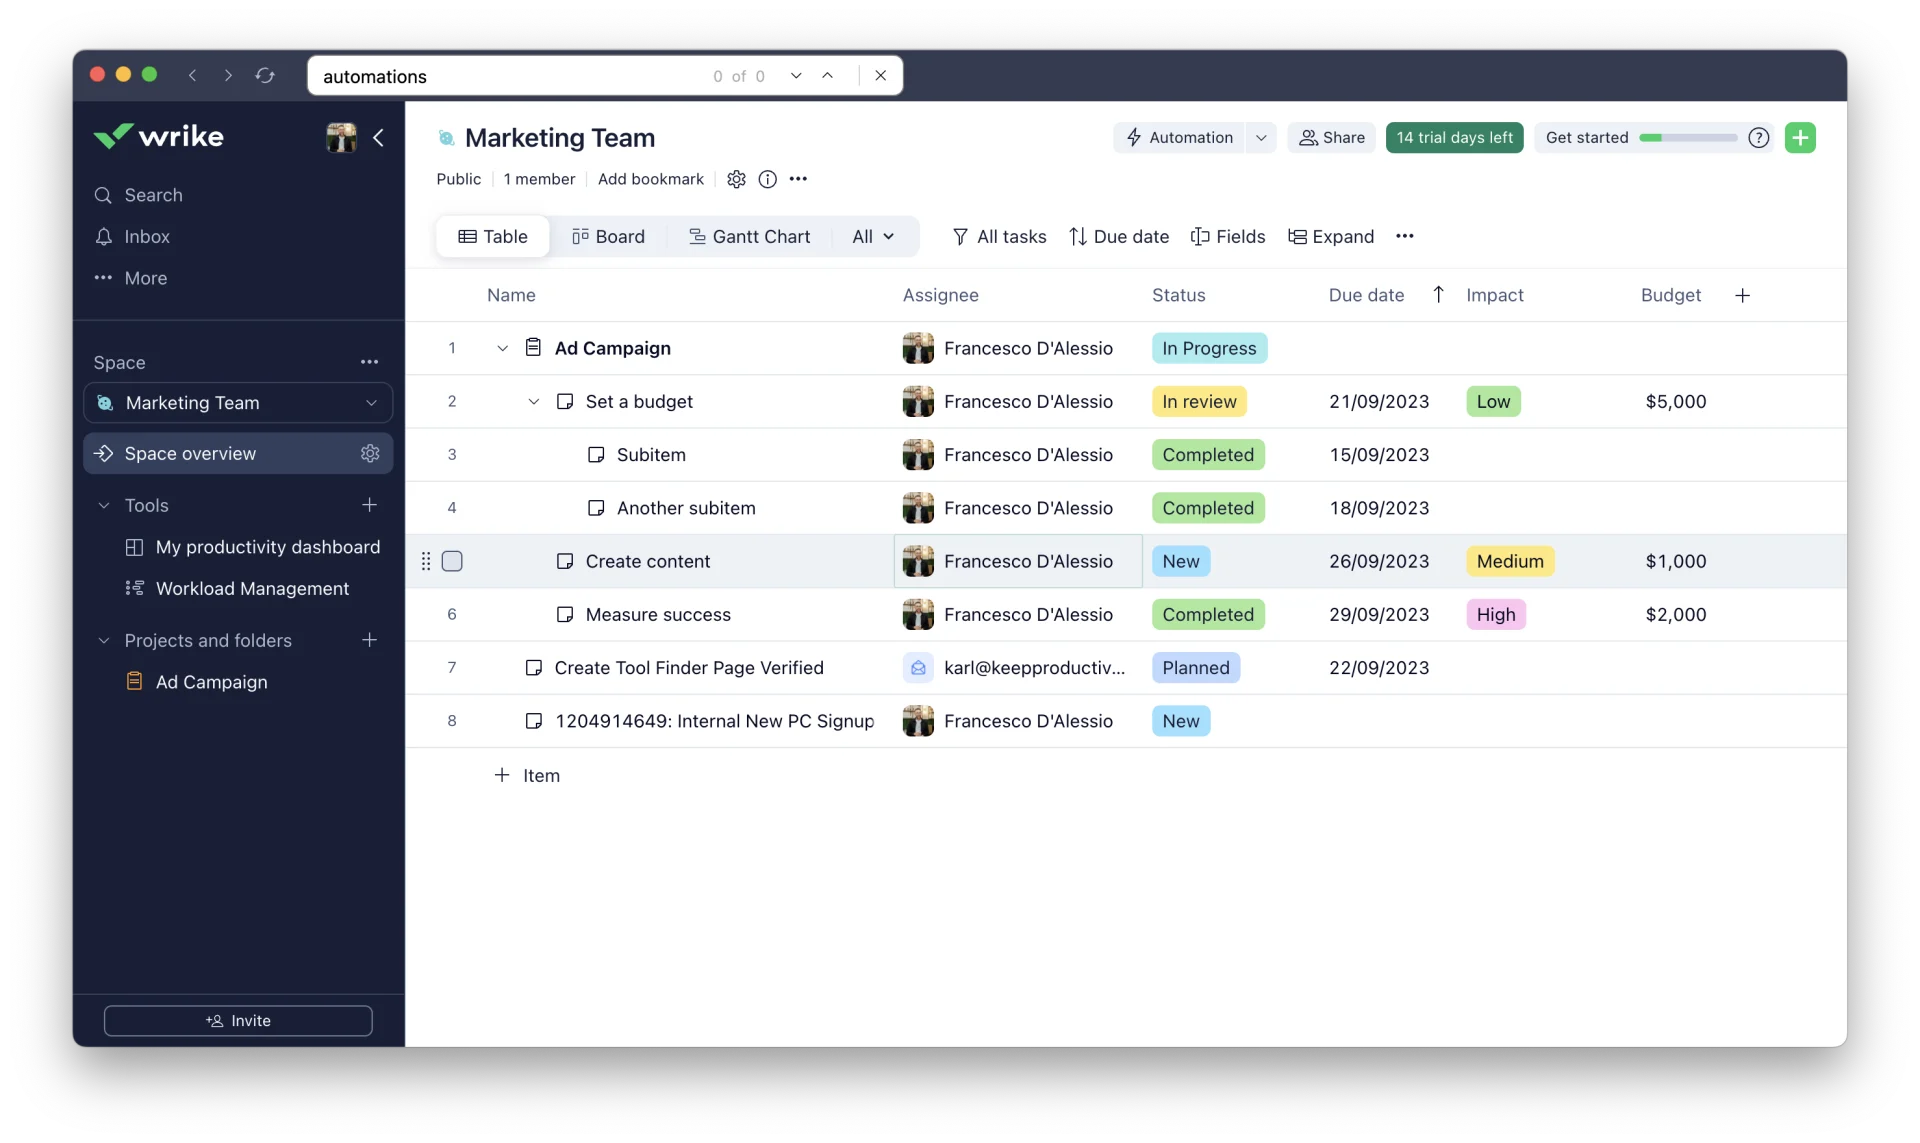 Managing Your Table in Wrike, Planning Tasks, Projects